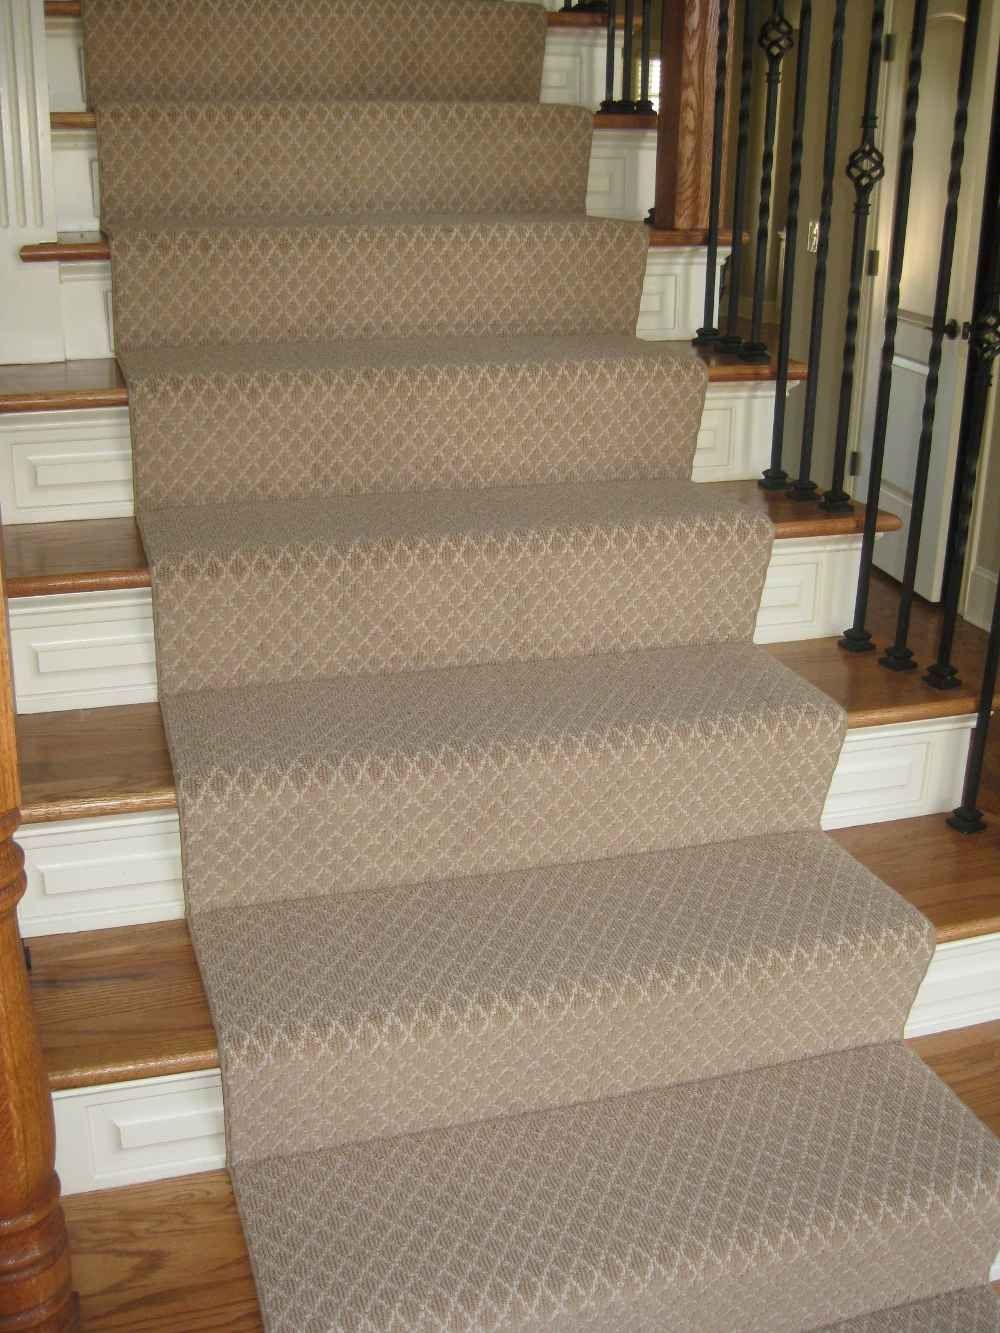 Keep Plastic Carpet Runners For Stairs Interior Home Design With Hallway Carpet Runners By The Foot (View 7 of 20)